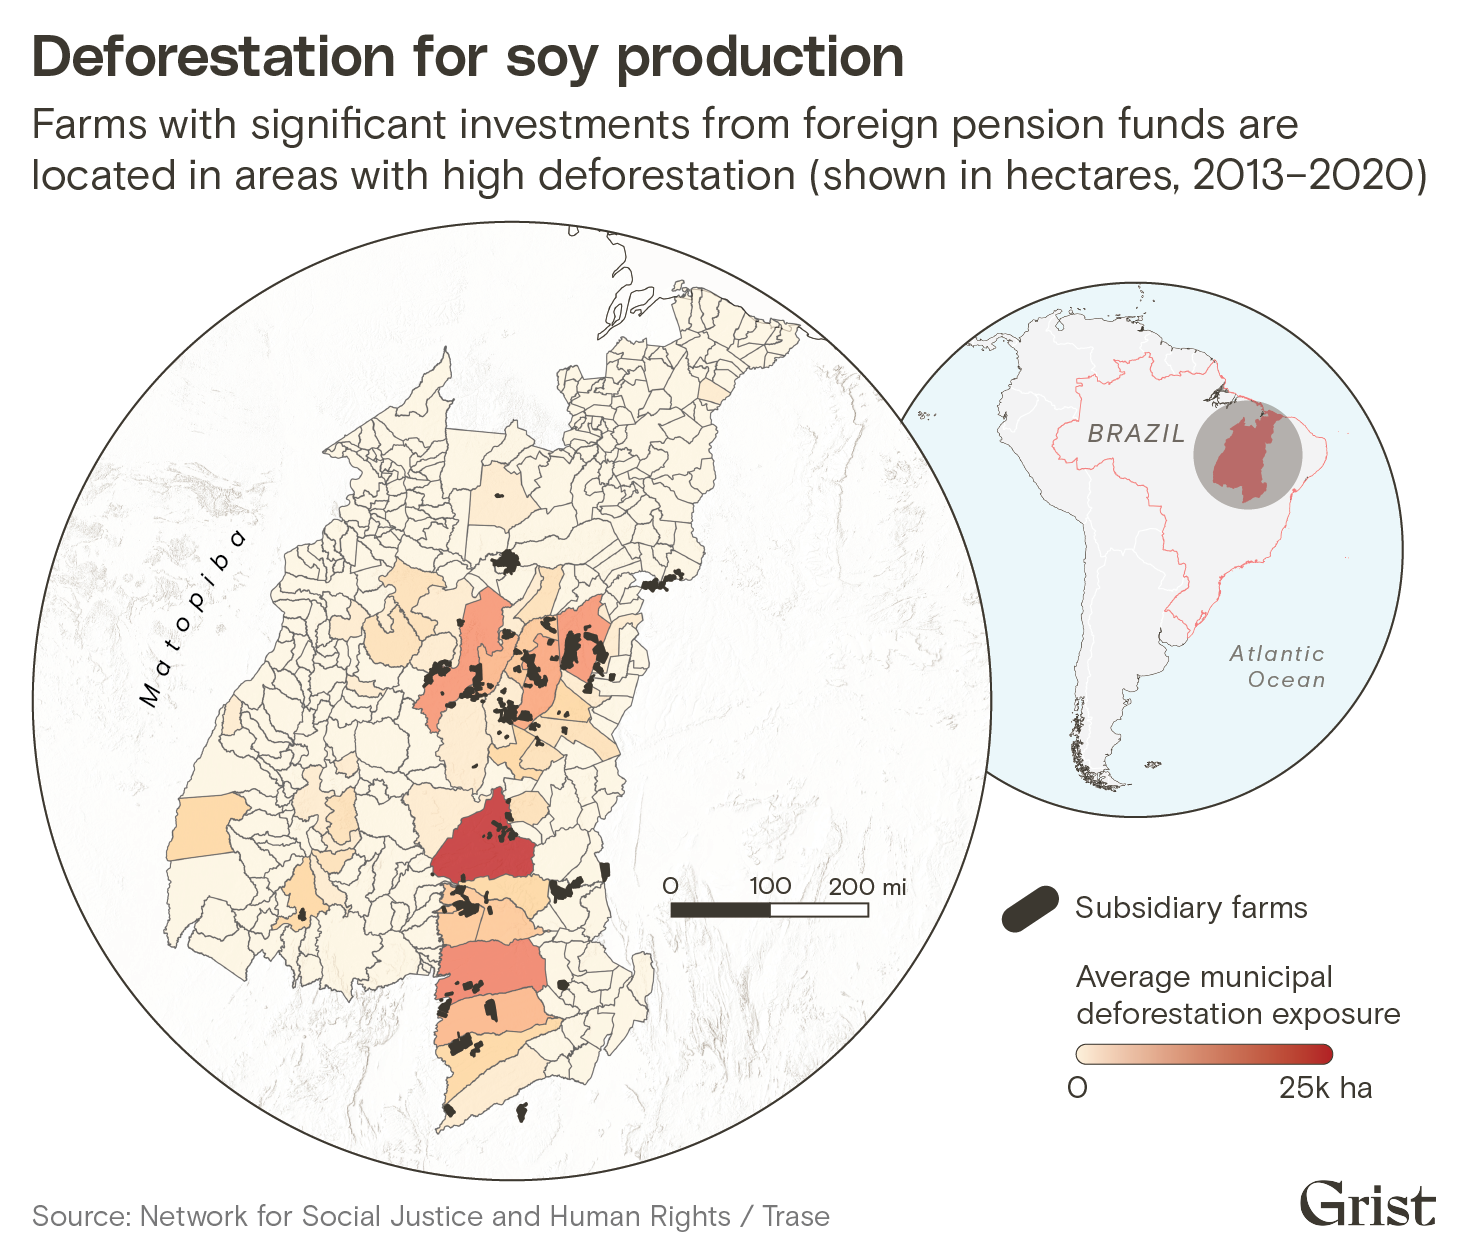 A map showing deforestation exposure in the Matopiba region of northeastern Brazil. Overlaid on the map are the locations of farms with significant investments from foreign pension funds. These farms are located in areas with high deforestation exposure.